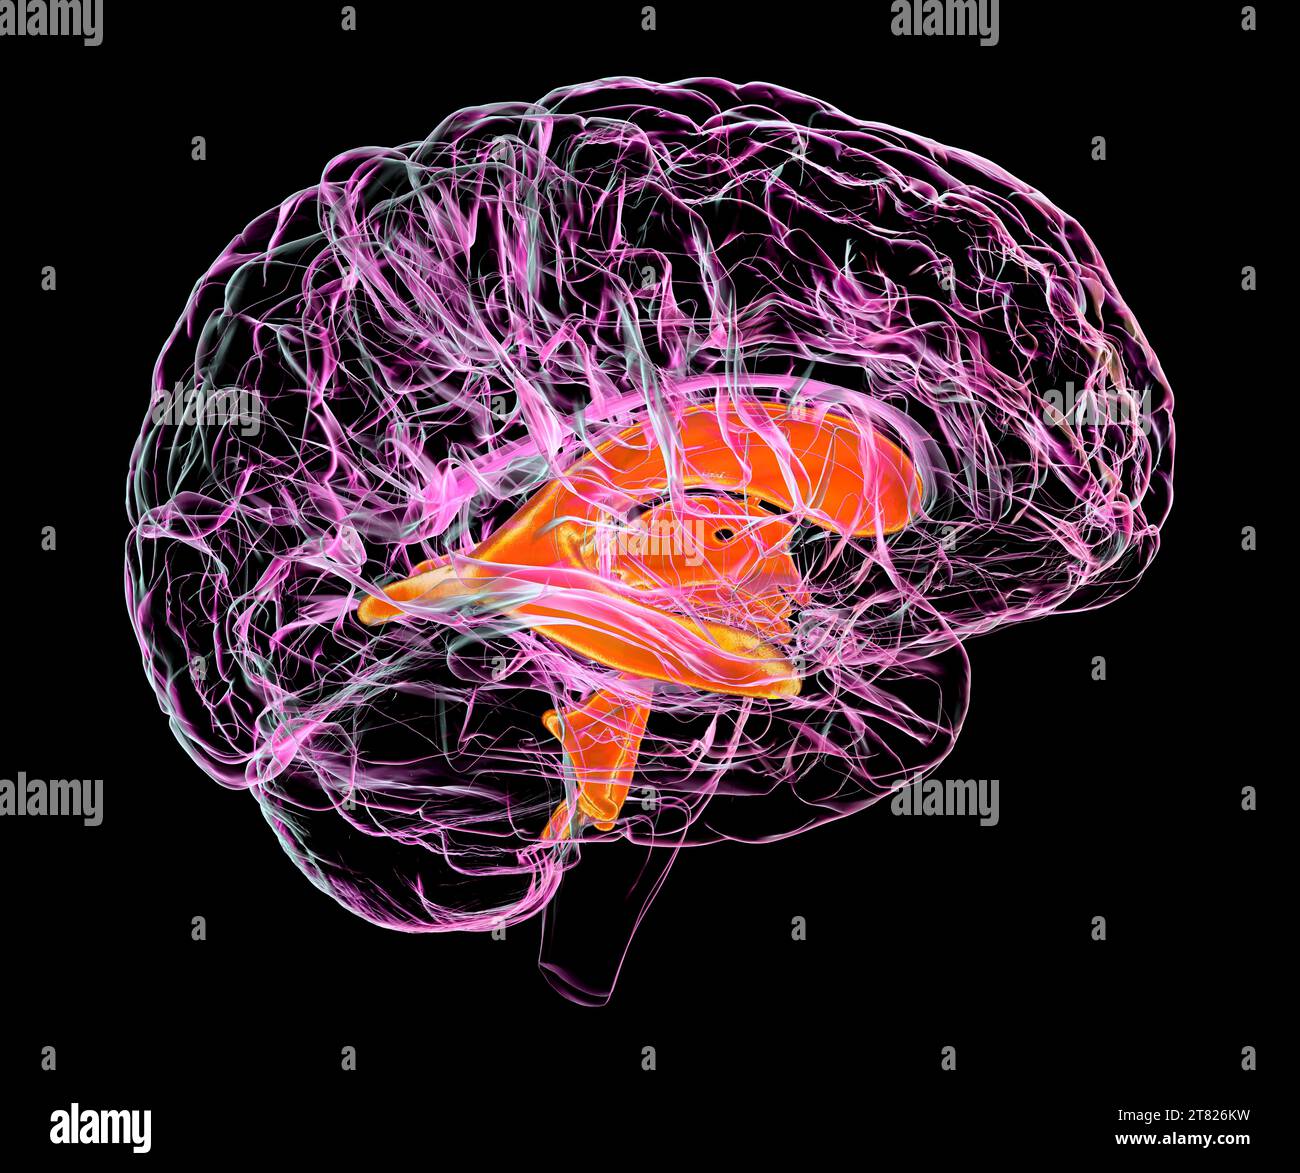 Ventricular system of a child's brain, illustration Stock Photo